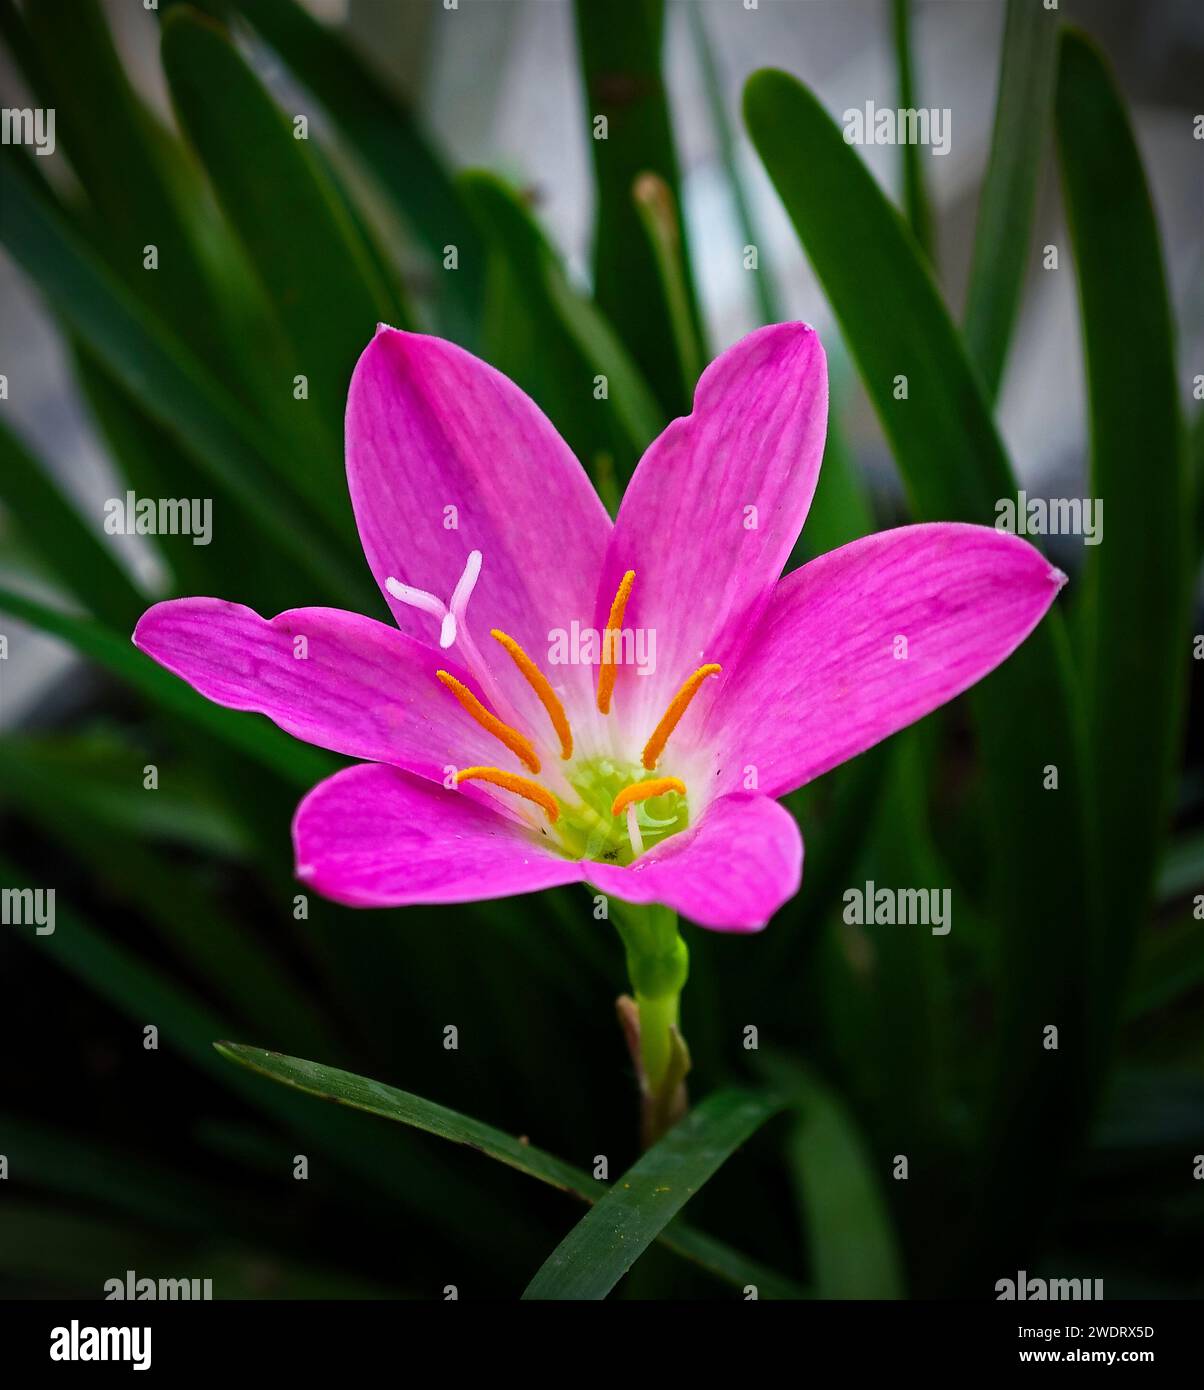 A close-up of a pink Zephyranthes minuta flower surrounded by green plants Stock Photo